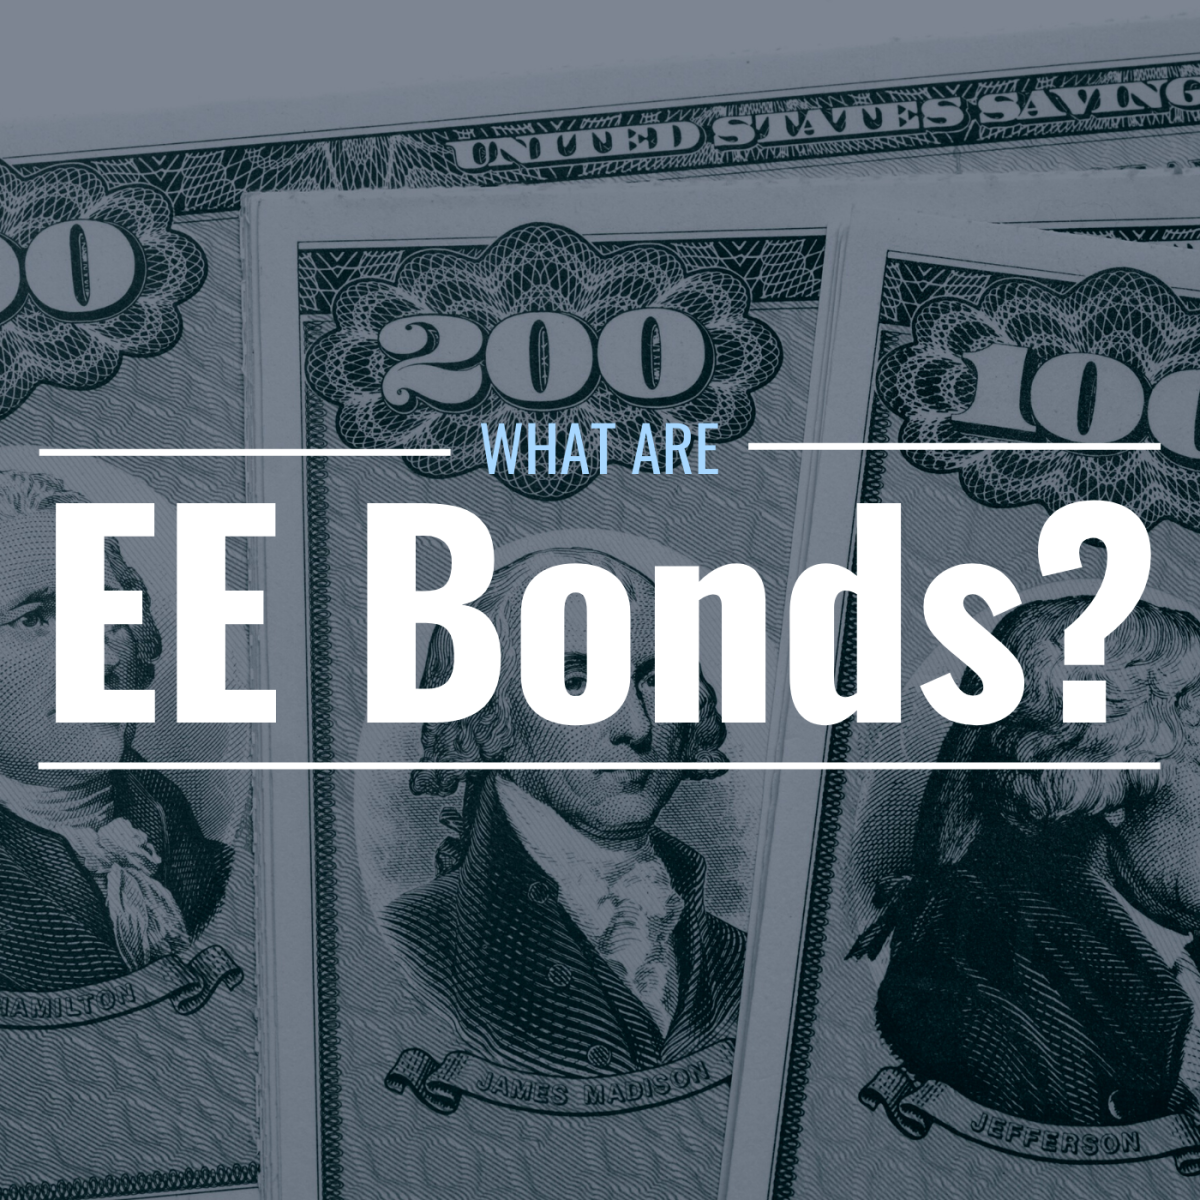 Image of U.S. savings bonds with text overlay: "What Are EE Bonds?"